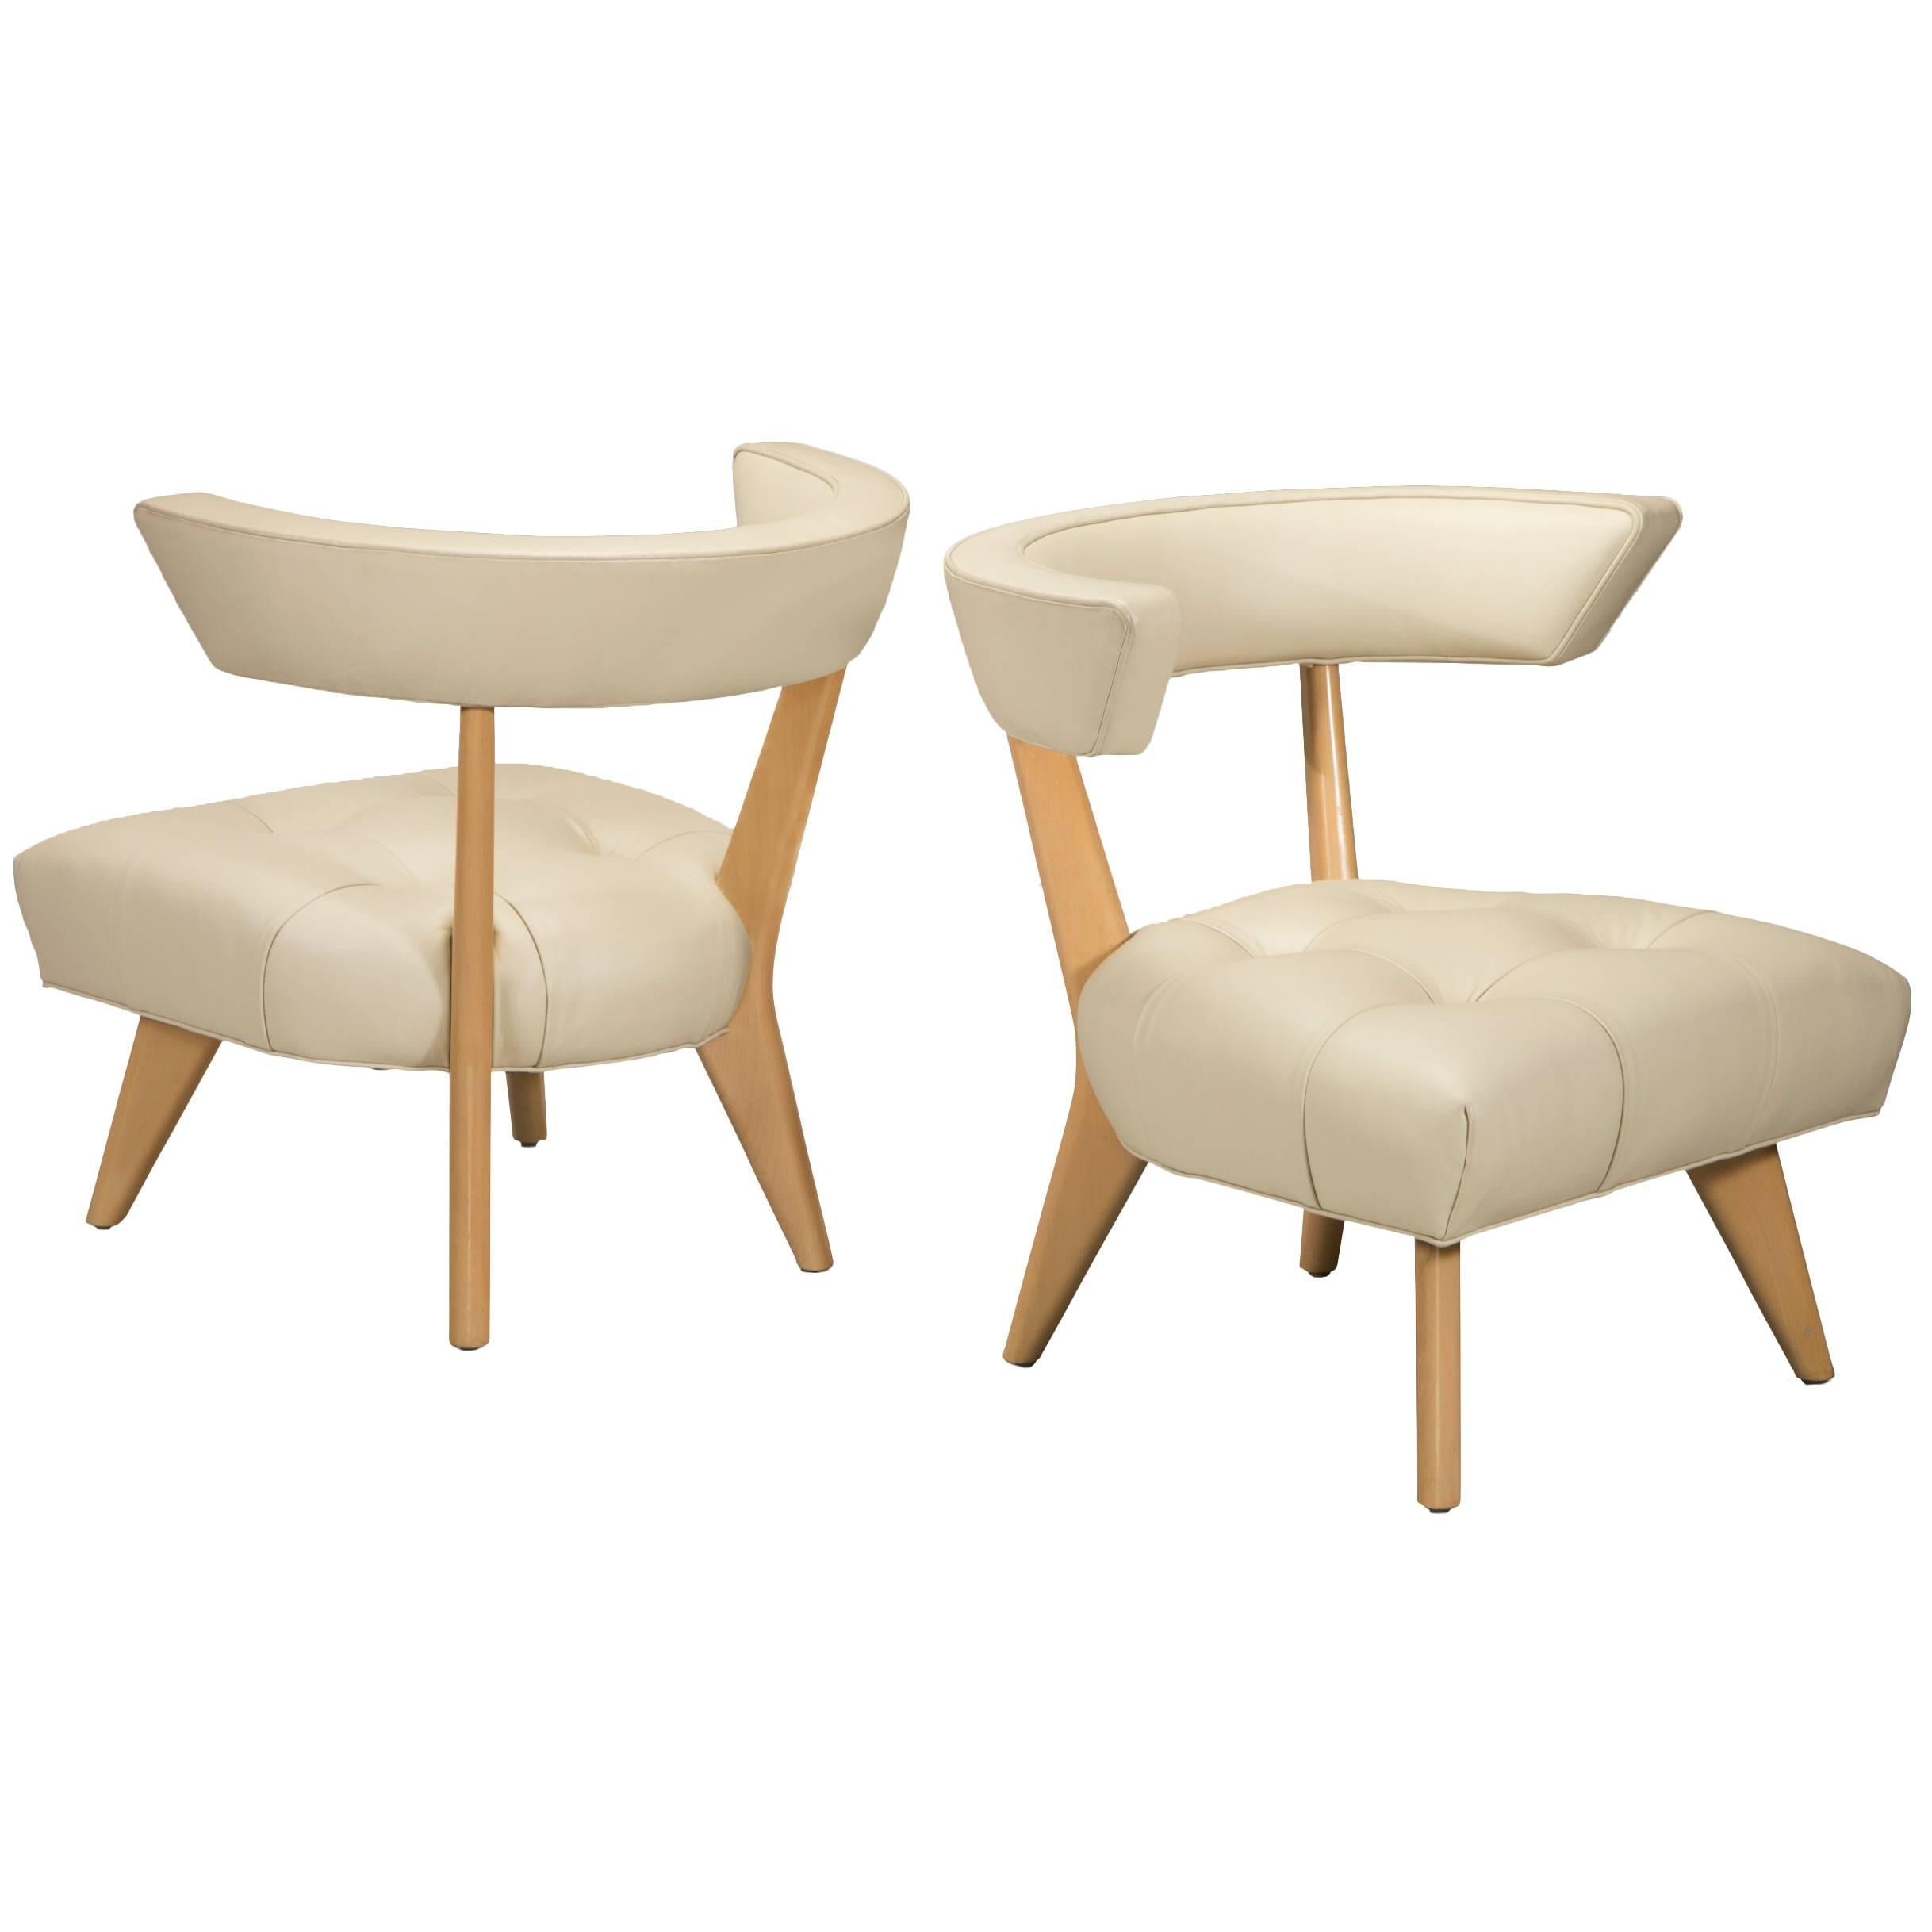 Billy Haines, Pair of Blonde Glazed Wood and Ivory Upholstered Hostess Chairs For Sale